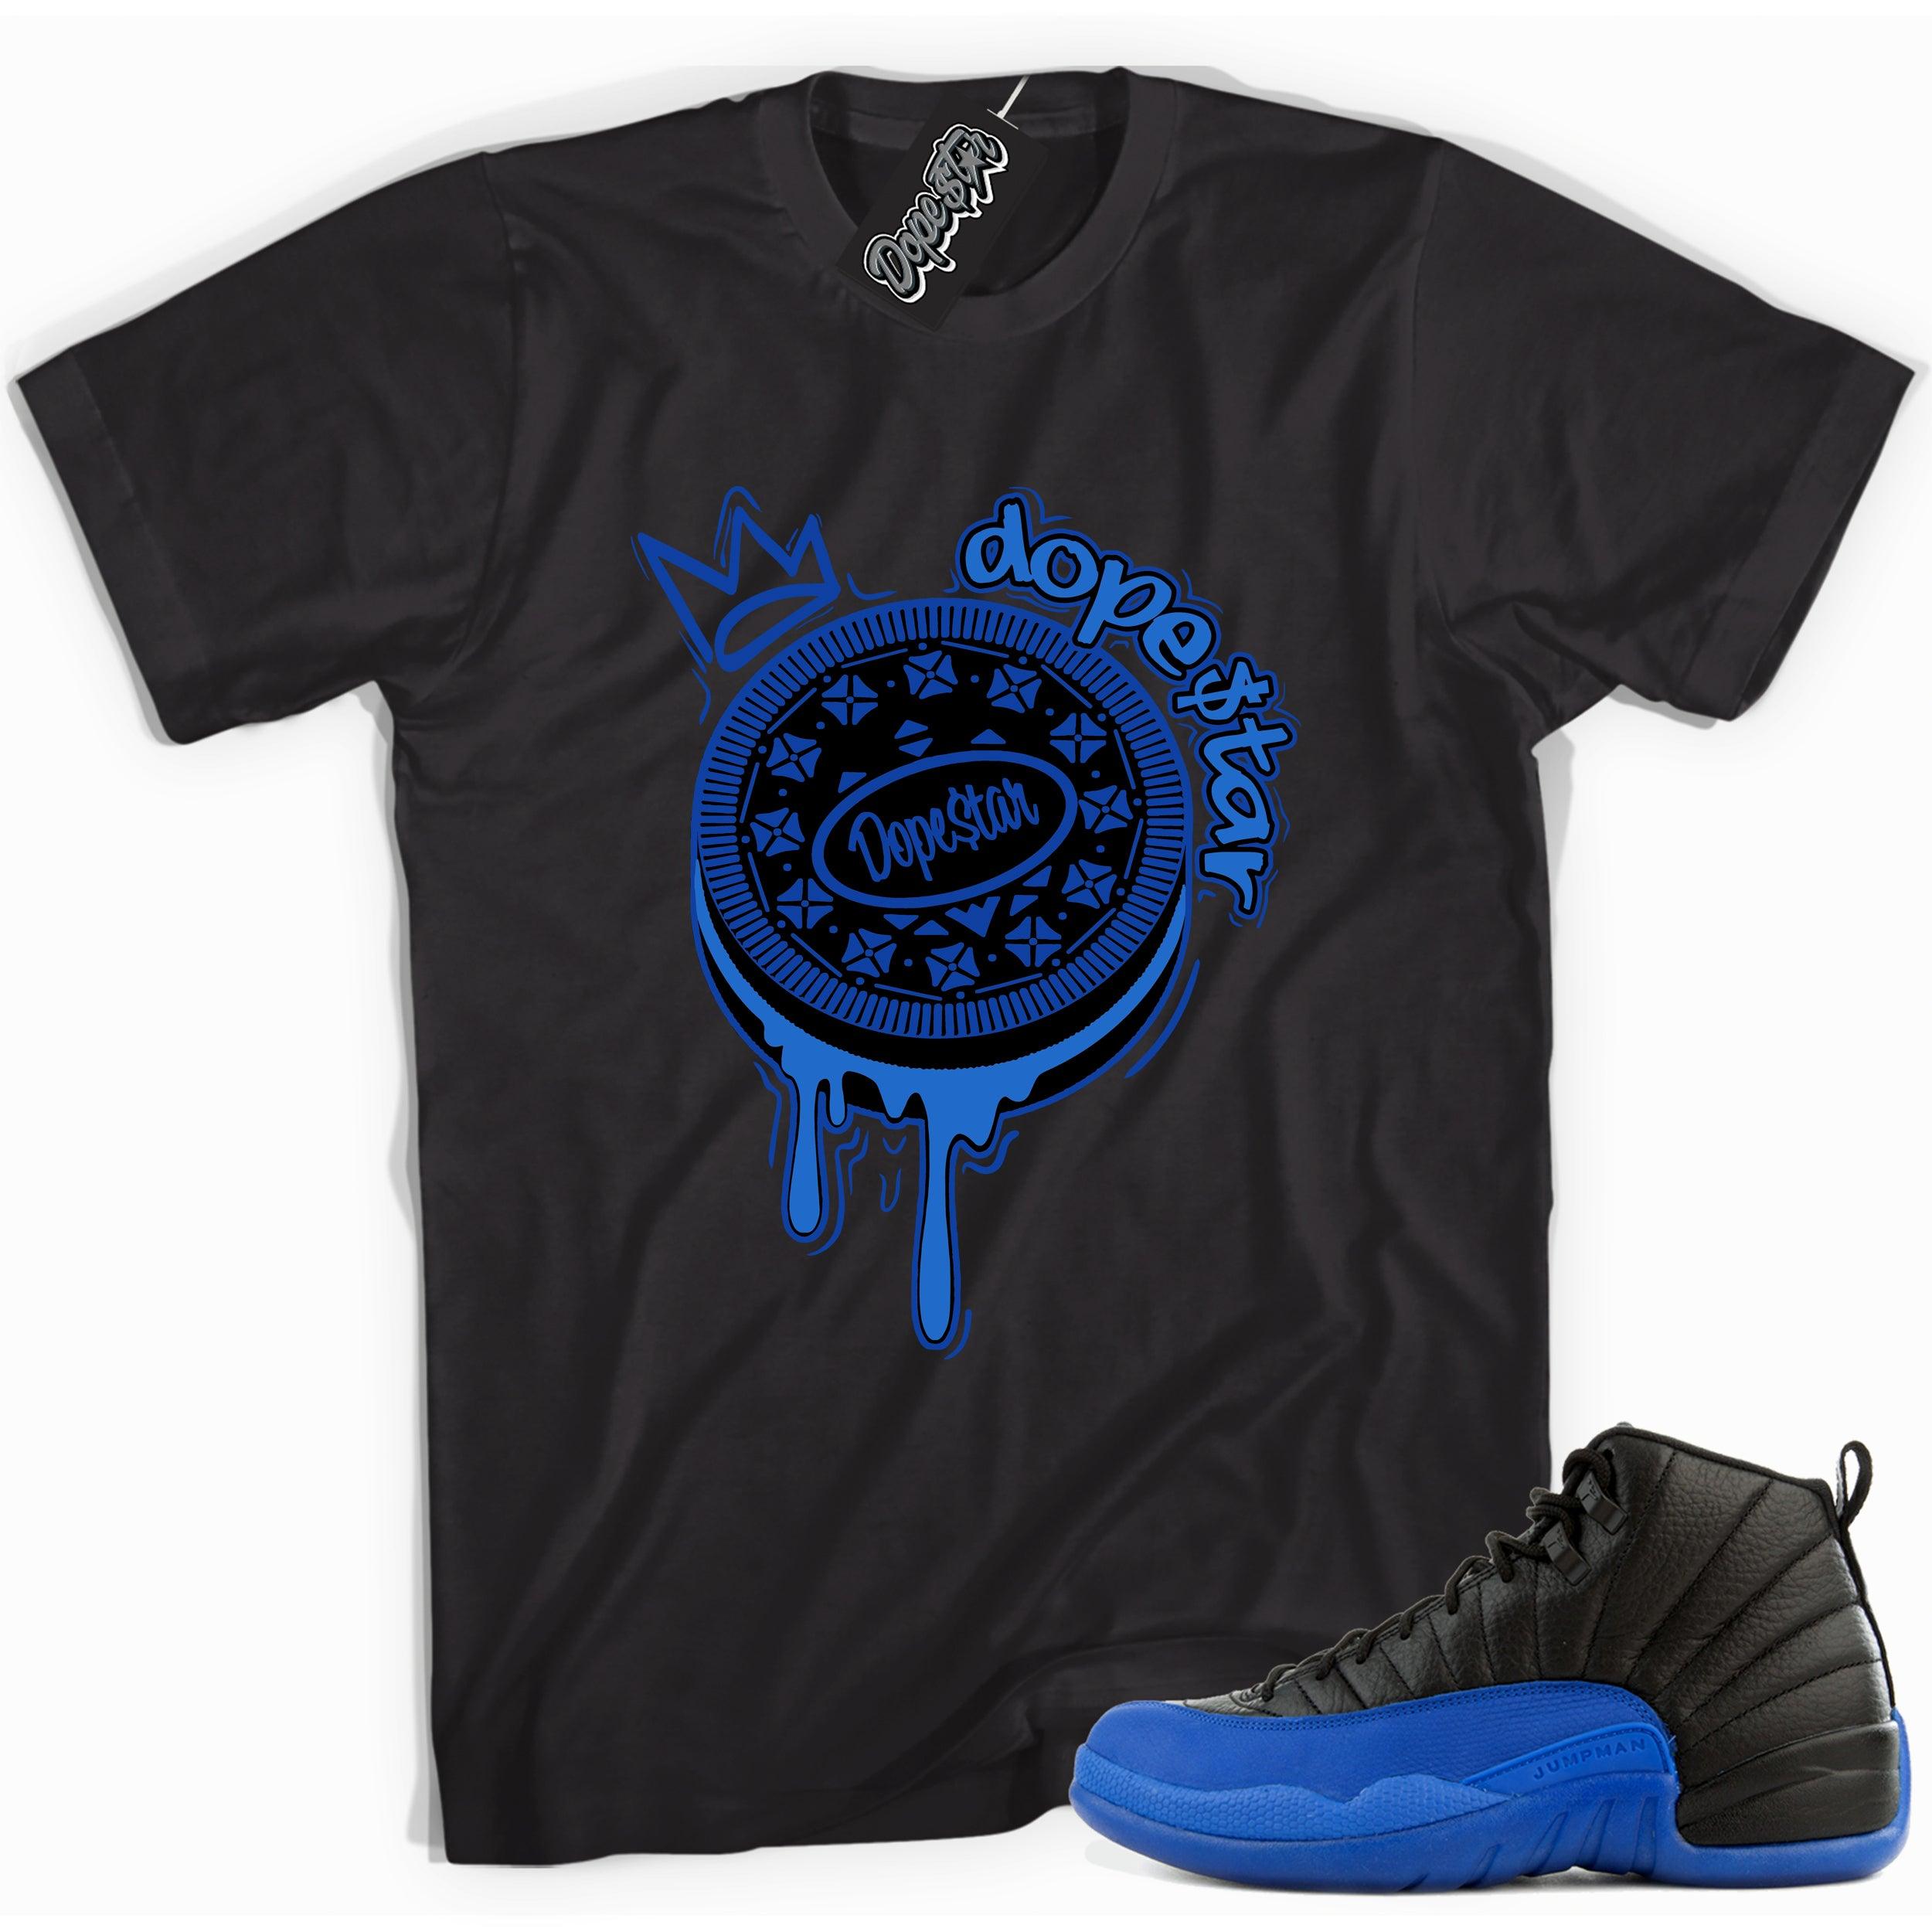 Cool black graphic tee with 'Oreo dope star $' print, that perfectly matches  Air Jordan 12 Retro Black Game Royal sneakers.